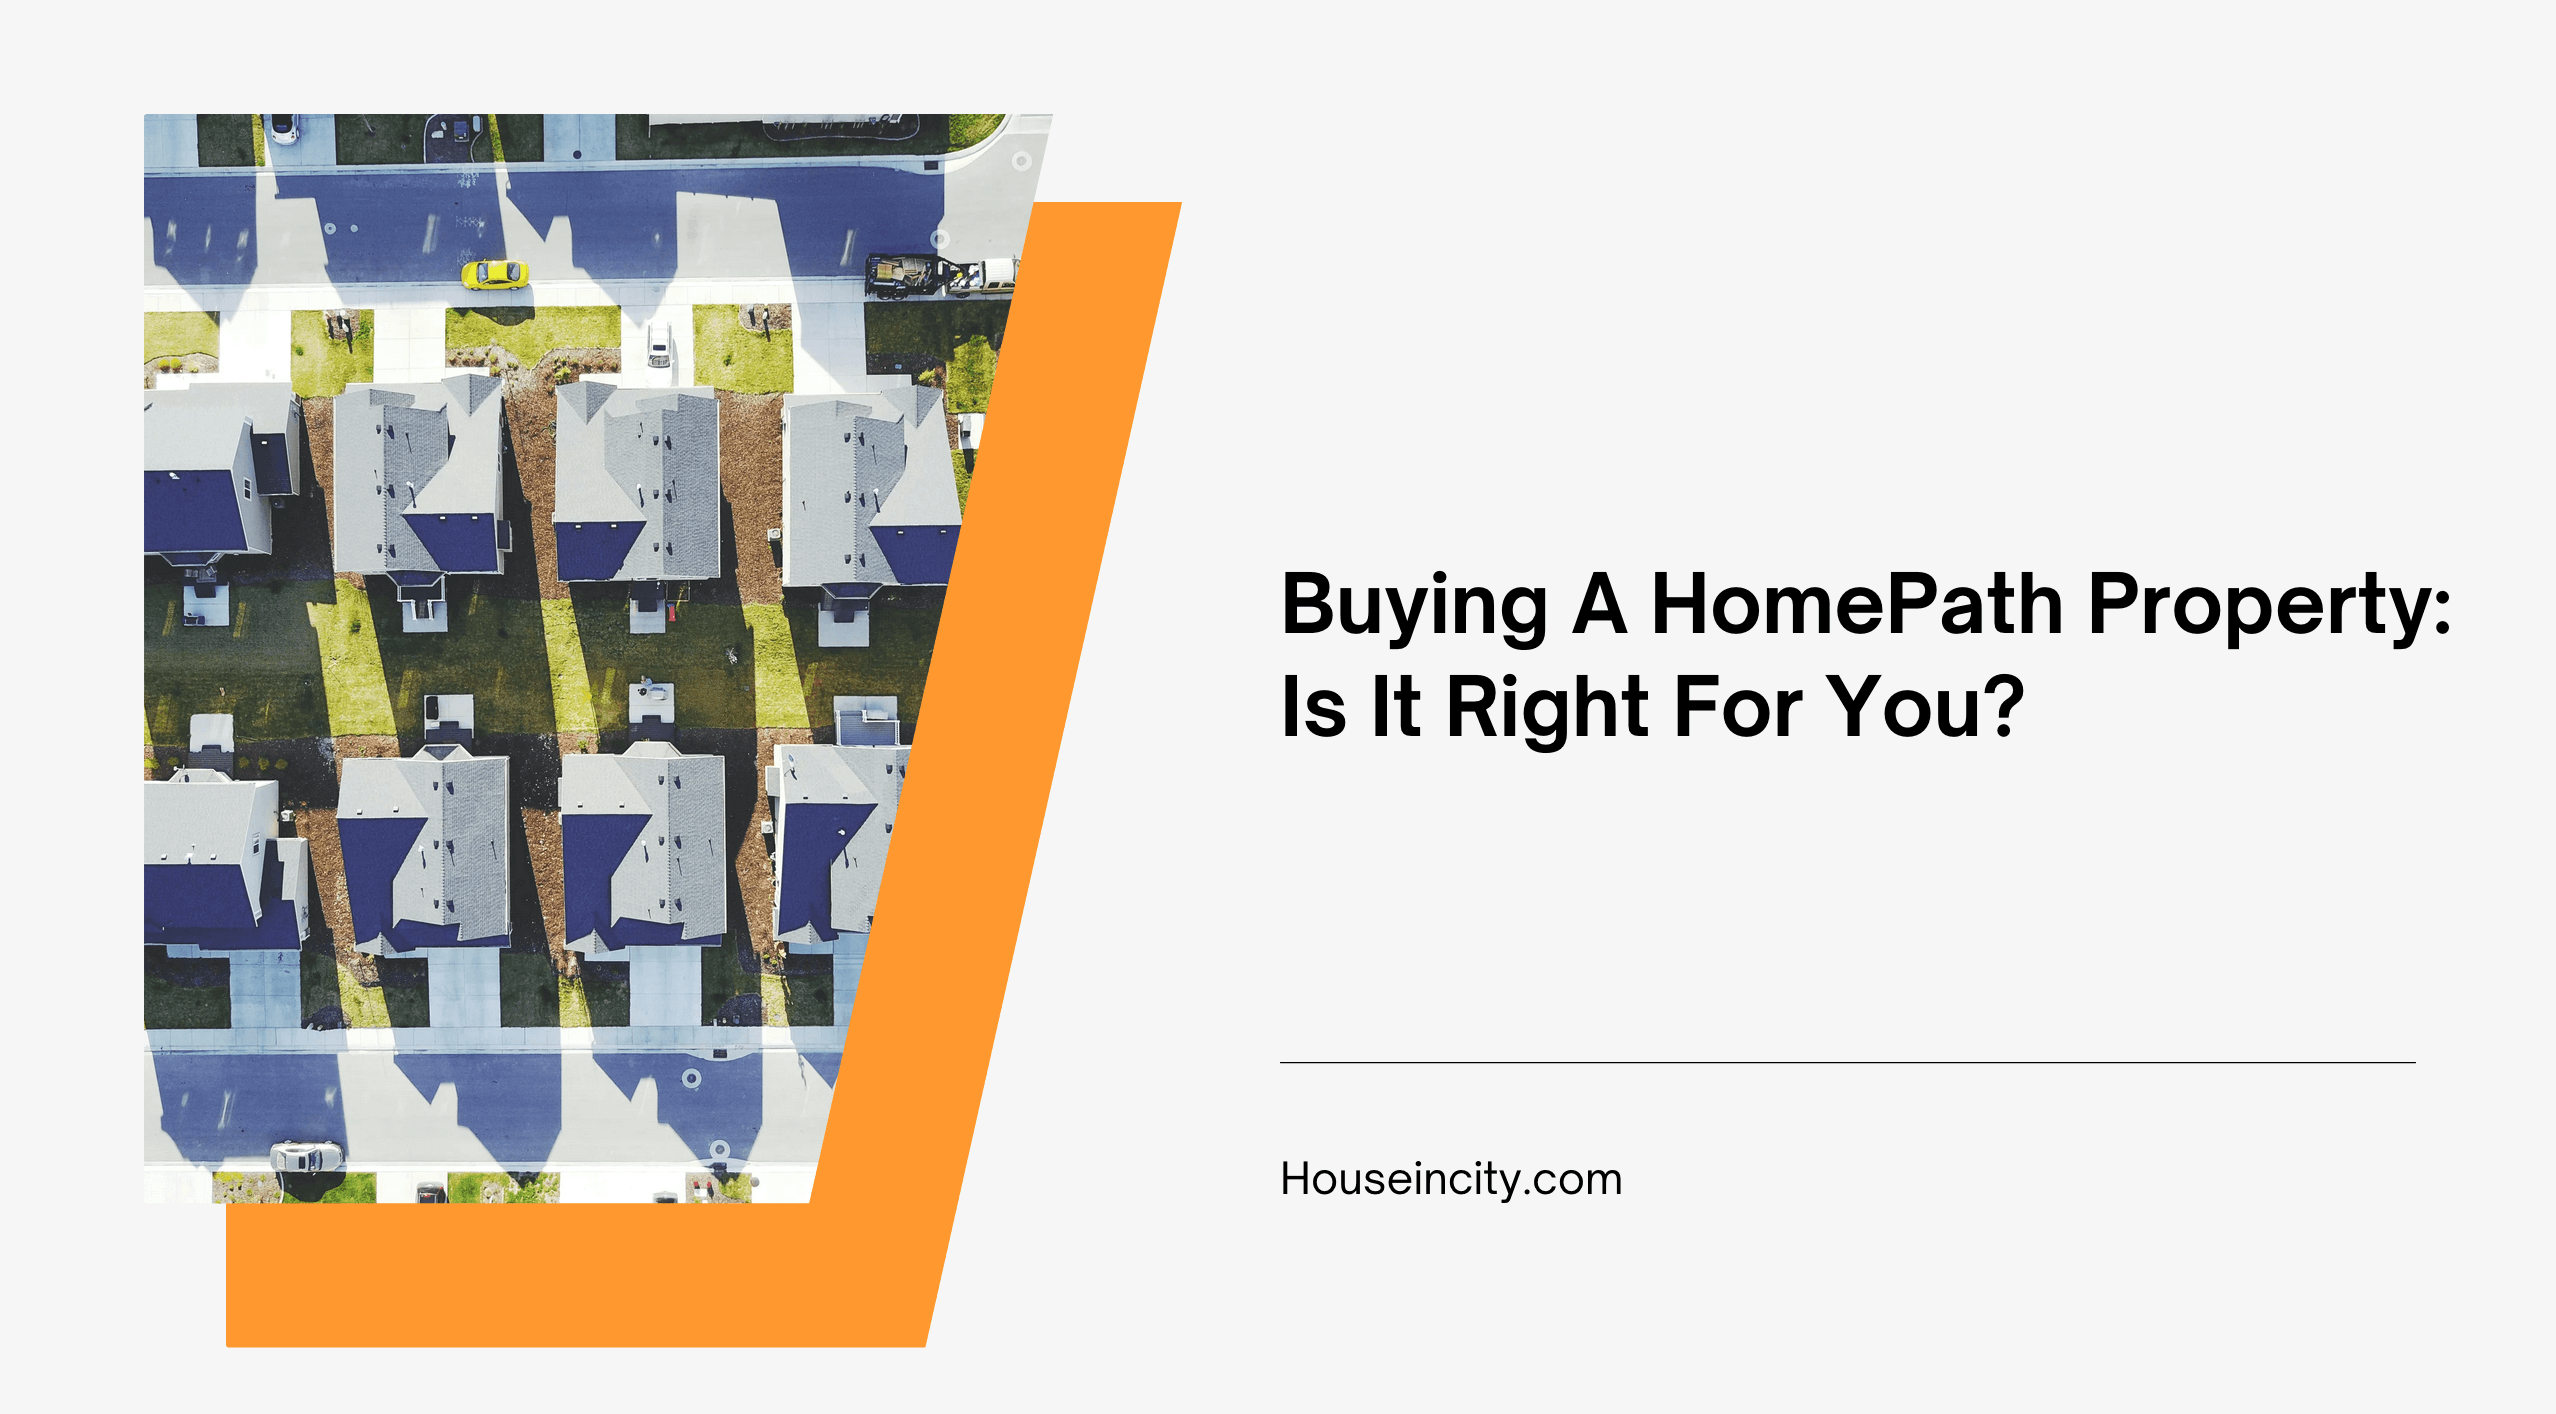 Buying A HomePath Property: Is It Right For You?